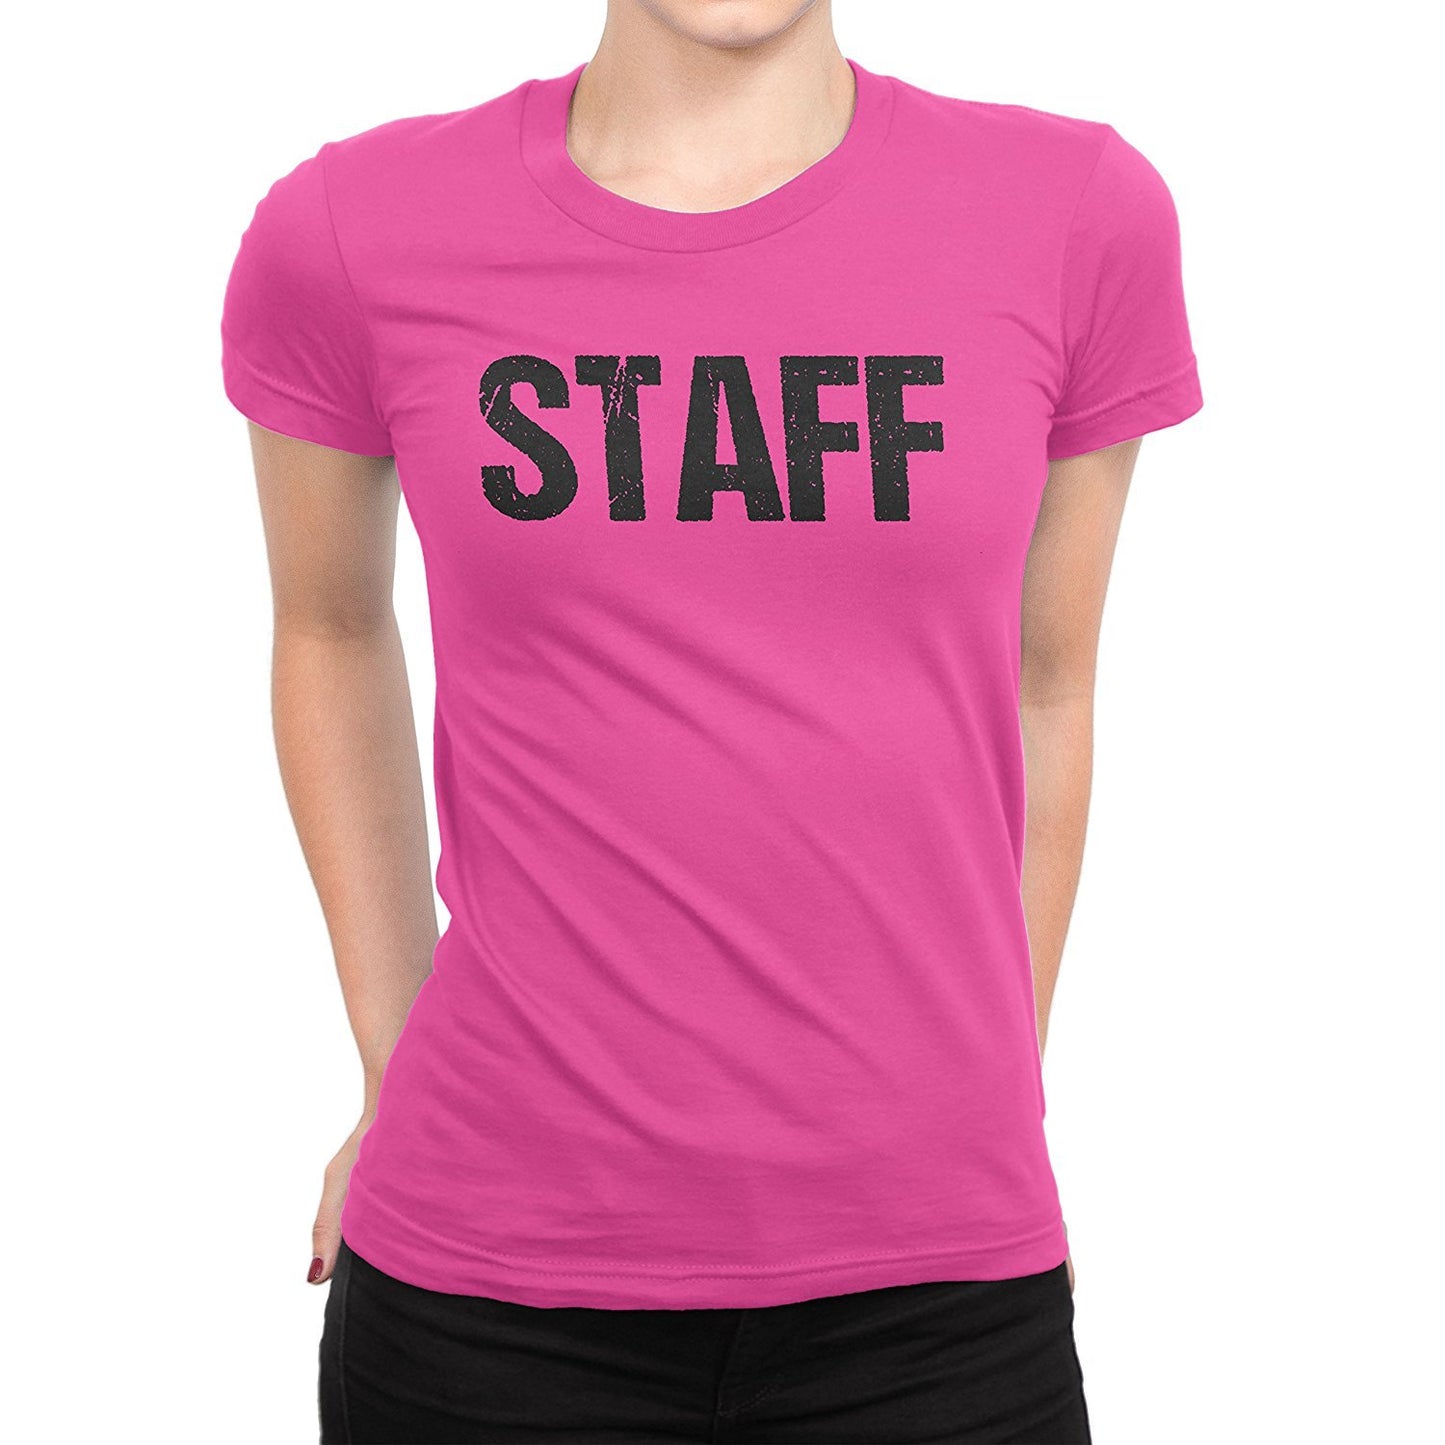 Ladies Neon Safety Pink Staff T-Shirt Front & Back Print Event Shirt Tee